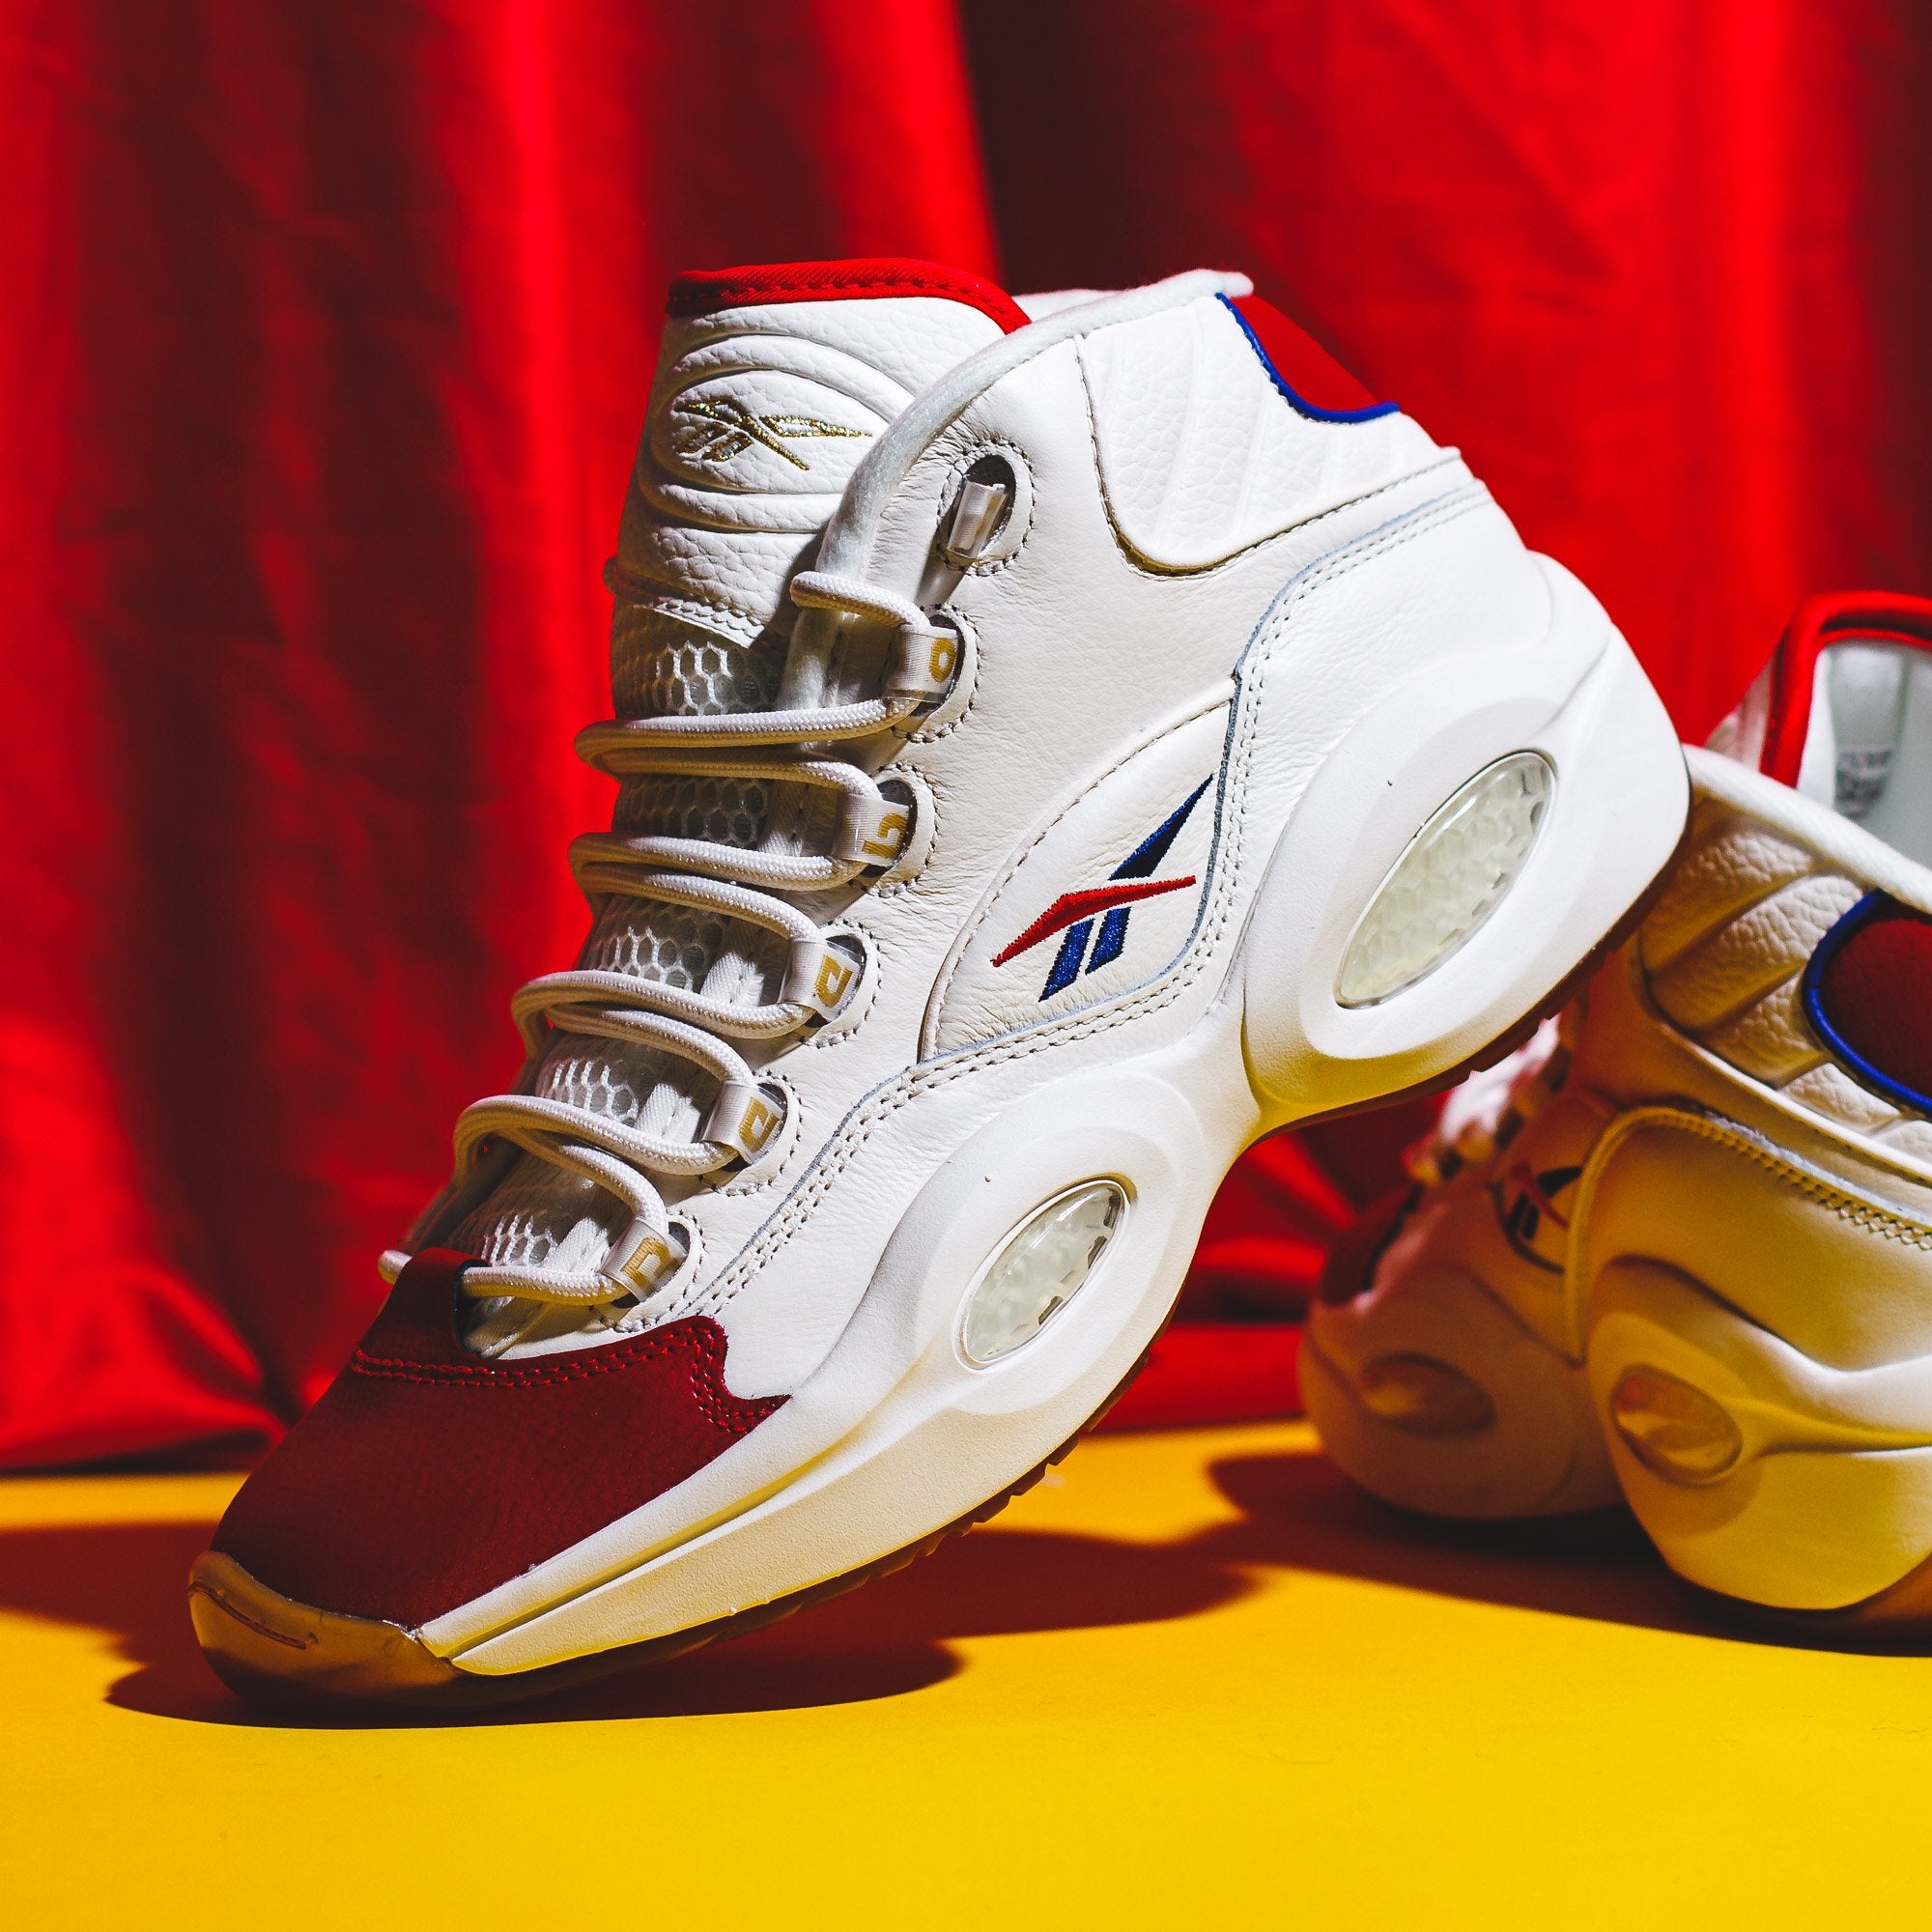 Allen Iverson Shoes, reebok-question-mid-nye-black-and-gold-allen-iverson- shoes-old-school